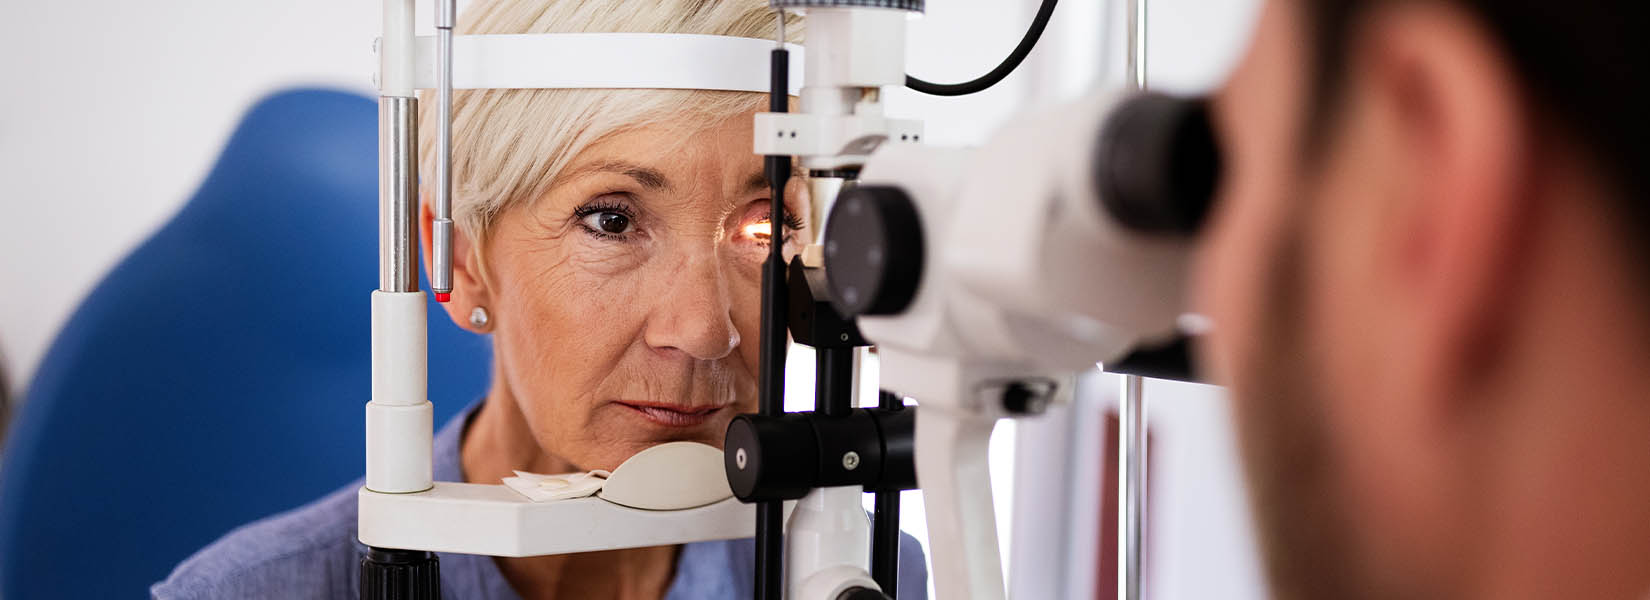 Preserve Your Vision With EyeCare Specialties - South Towne